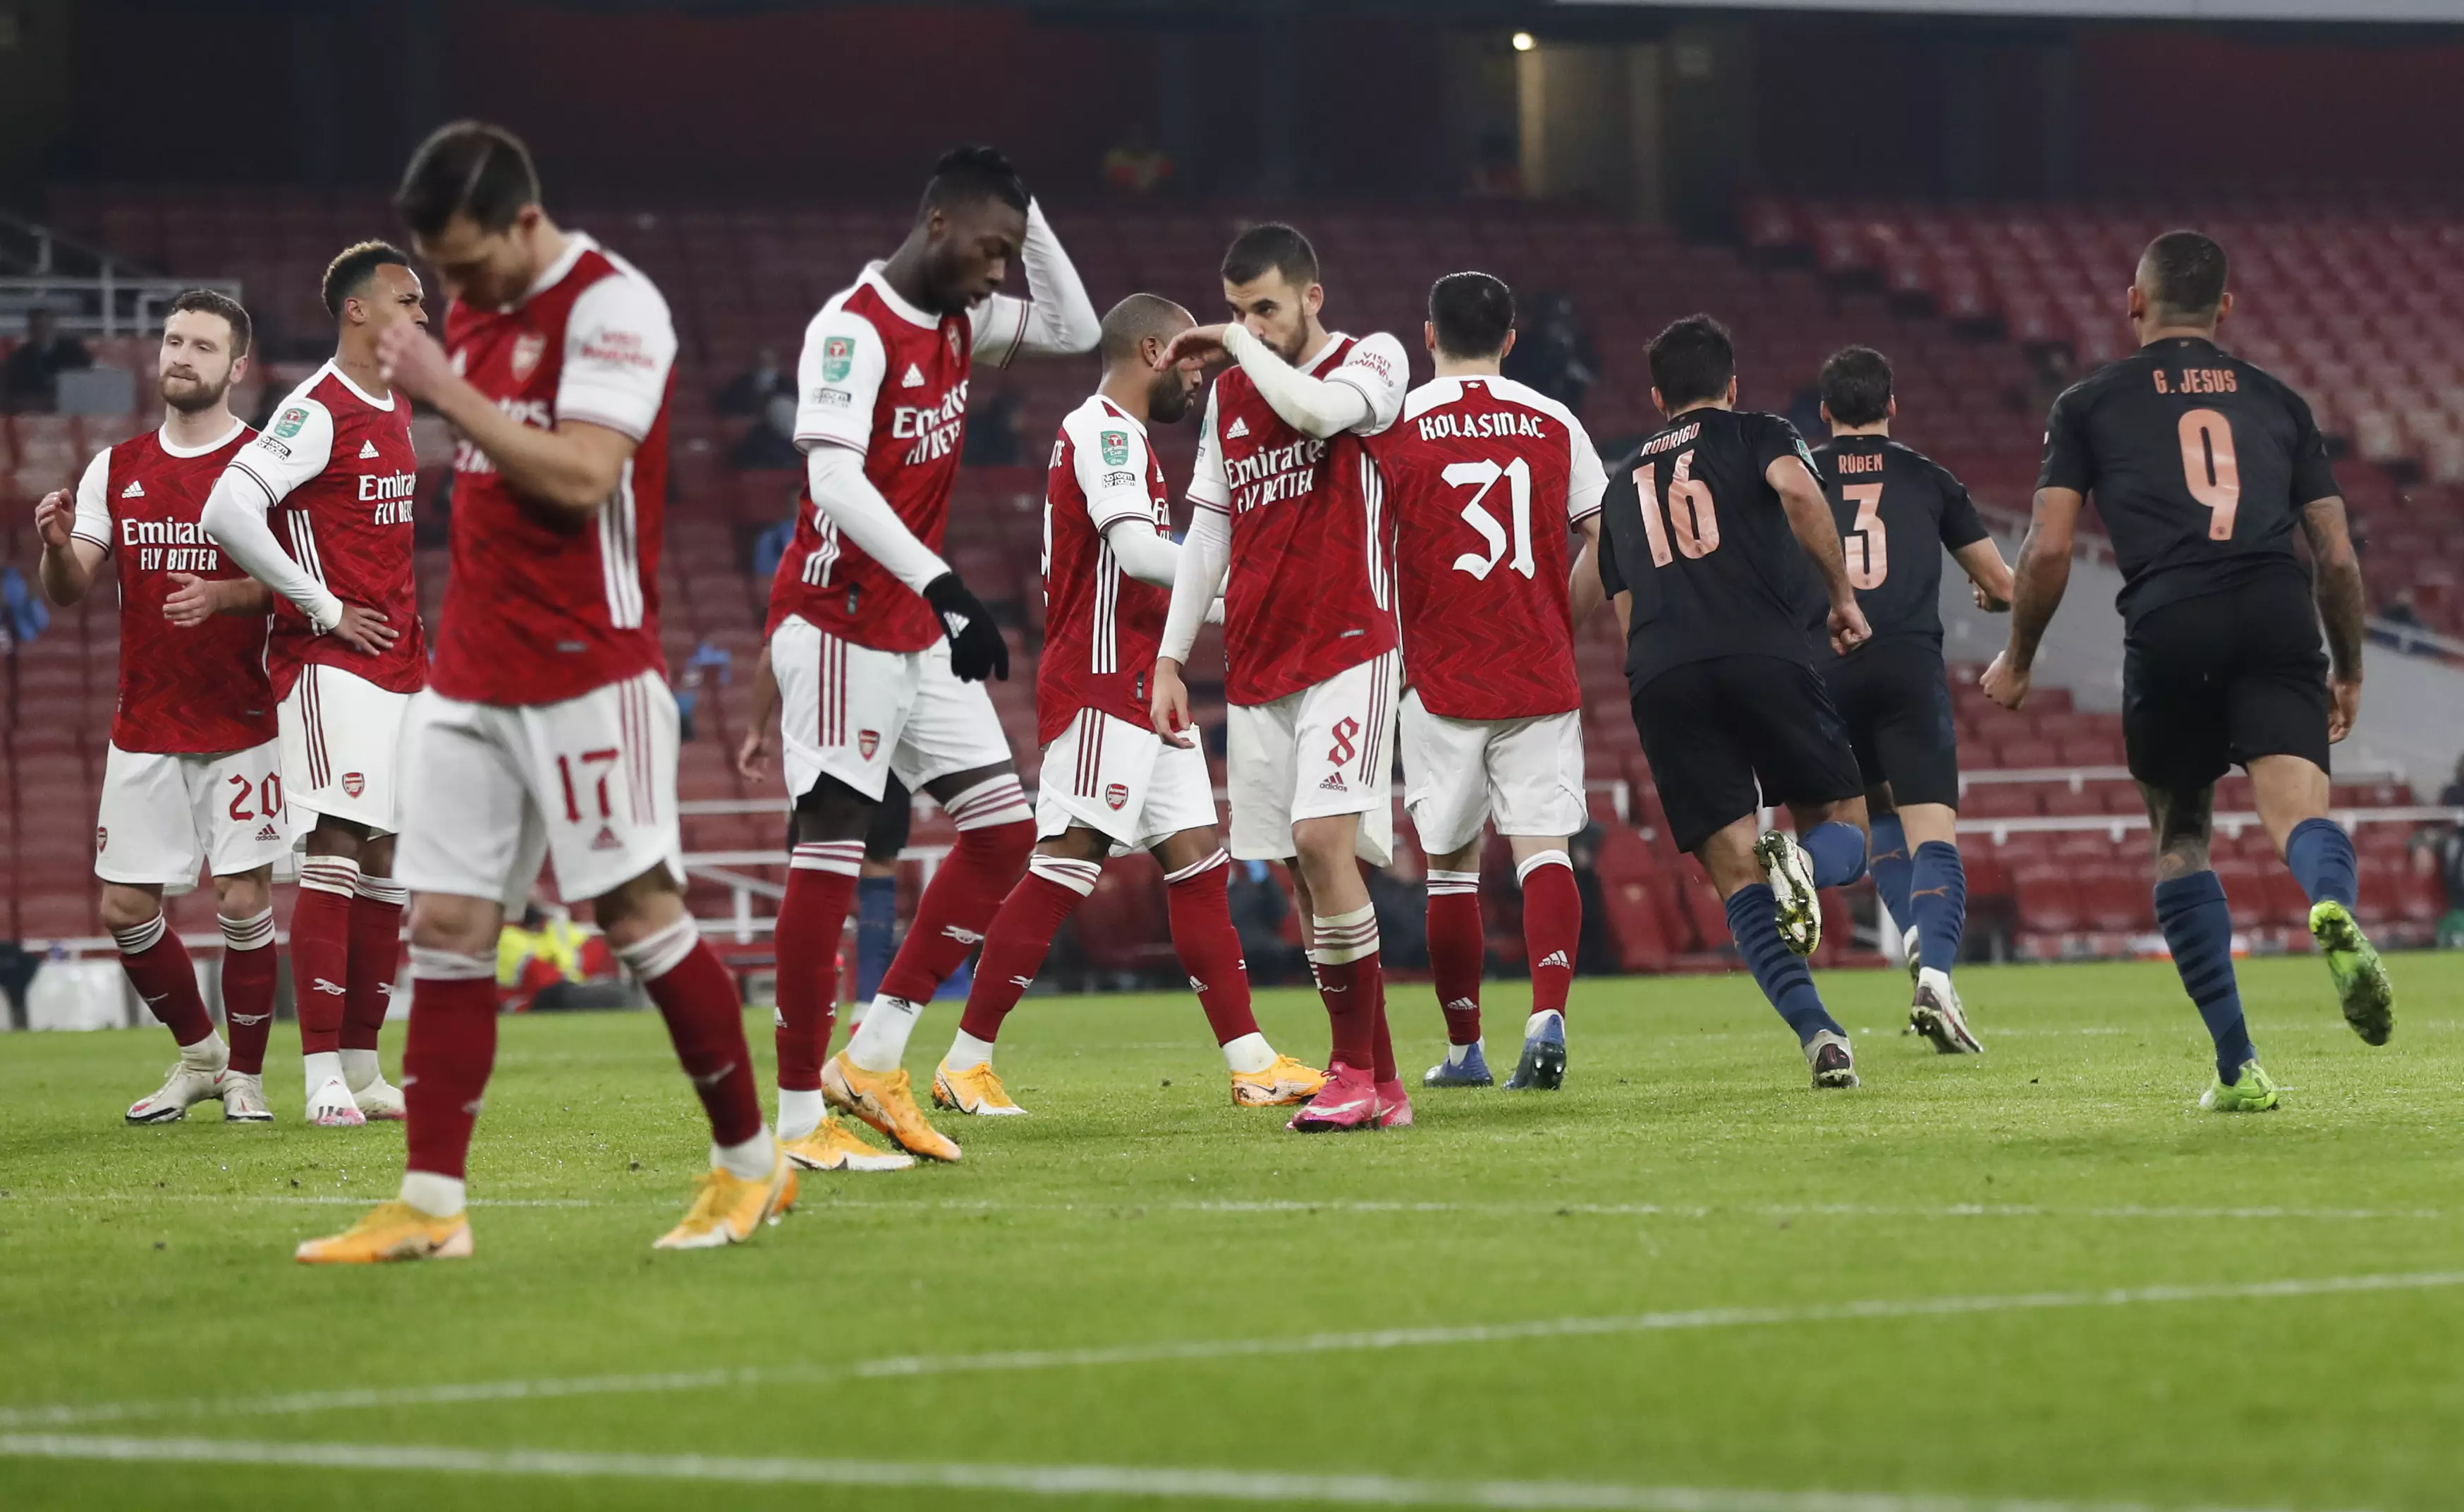 Arsenal players look dejected after Manchester City score in the Carabao Cup. Image: PA Images